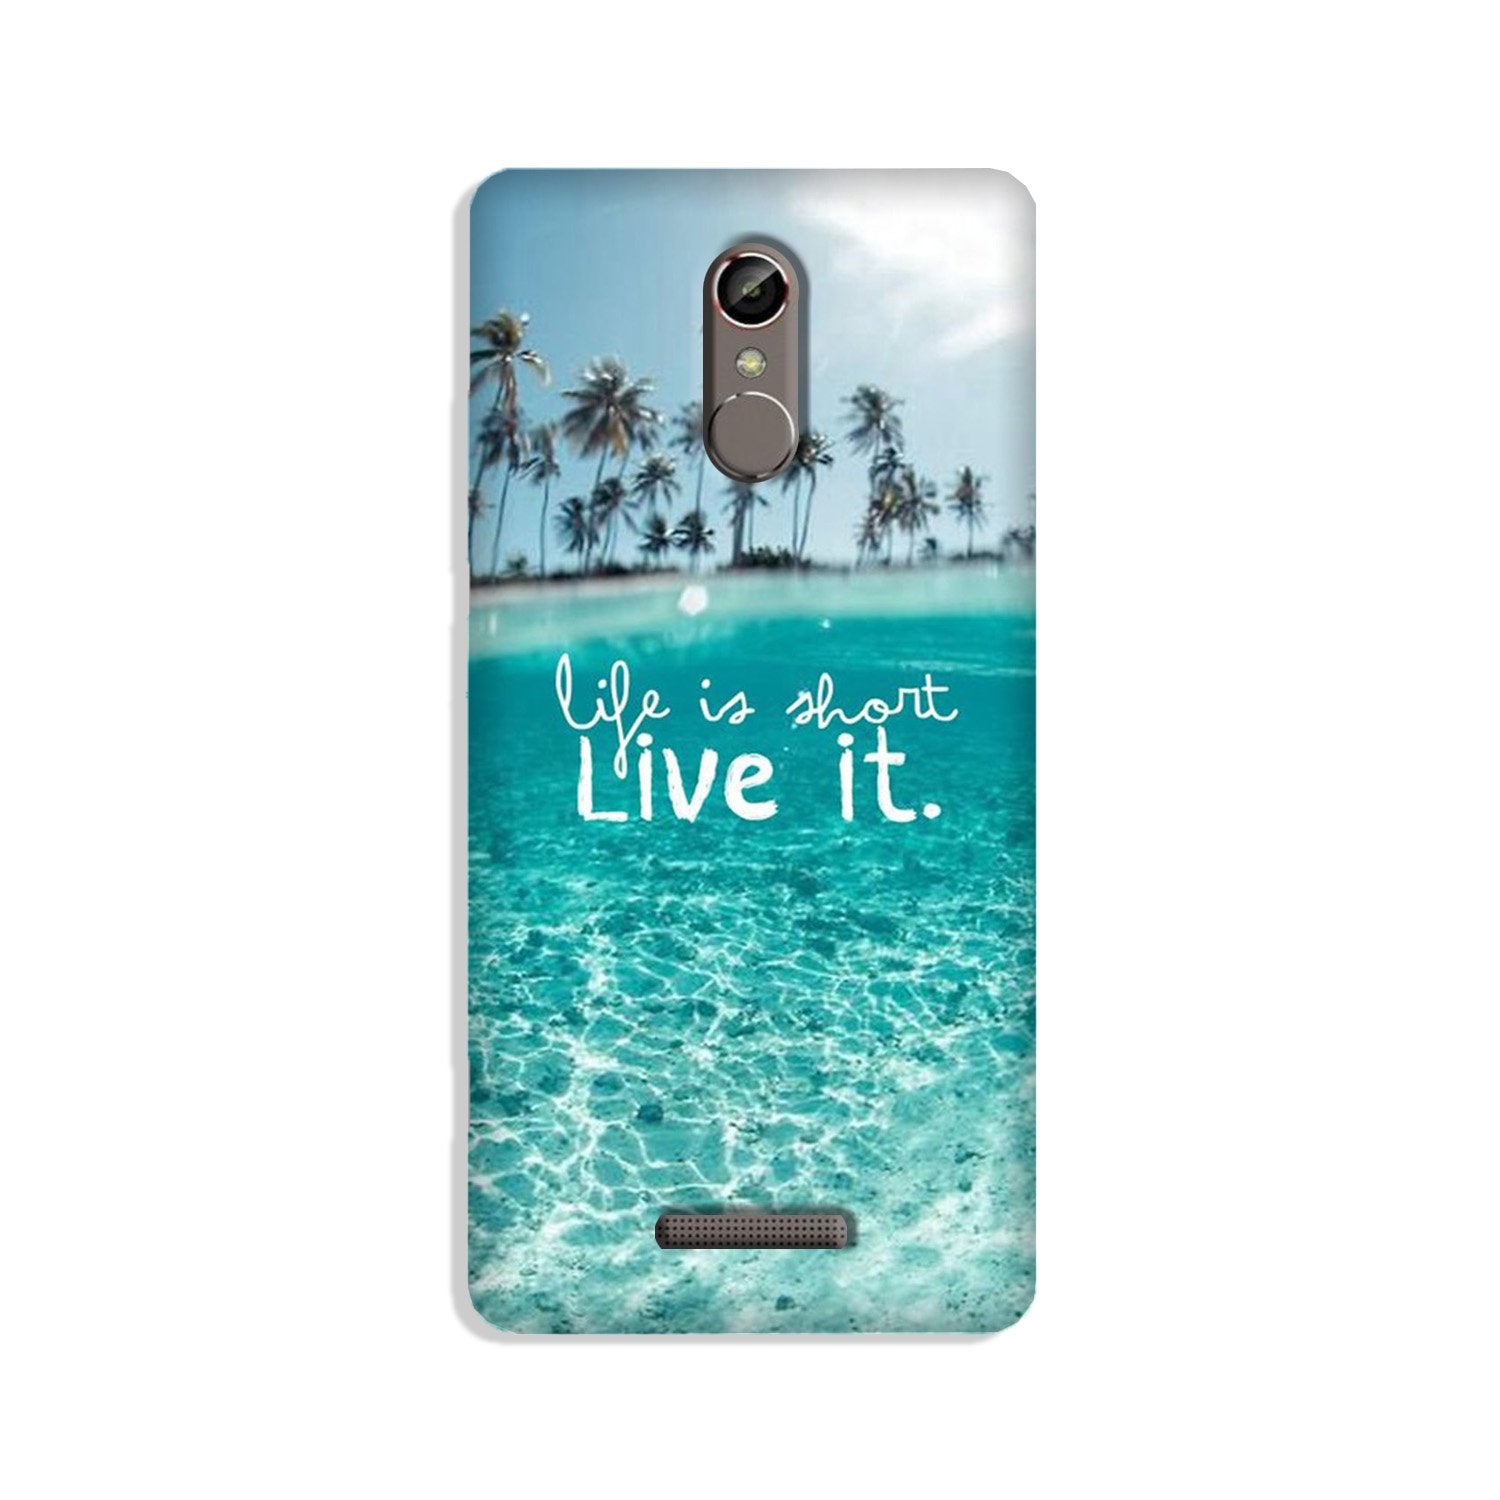 Life is short live it Case for Gionee S6s